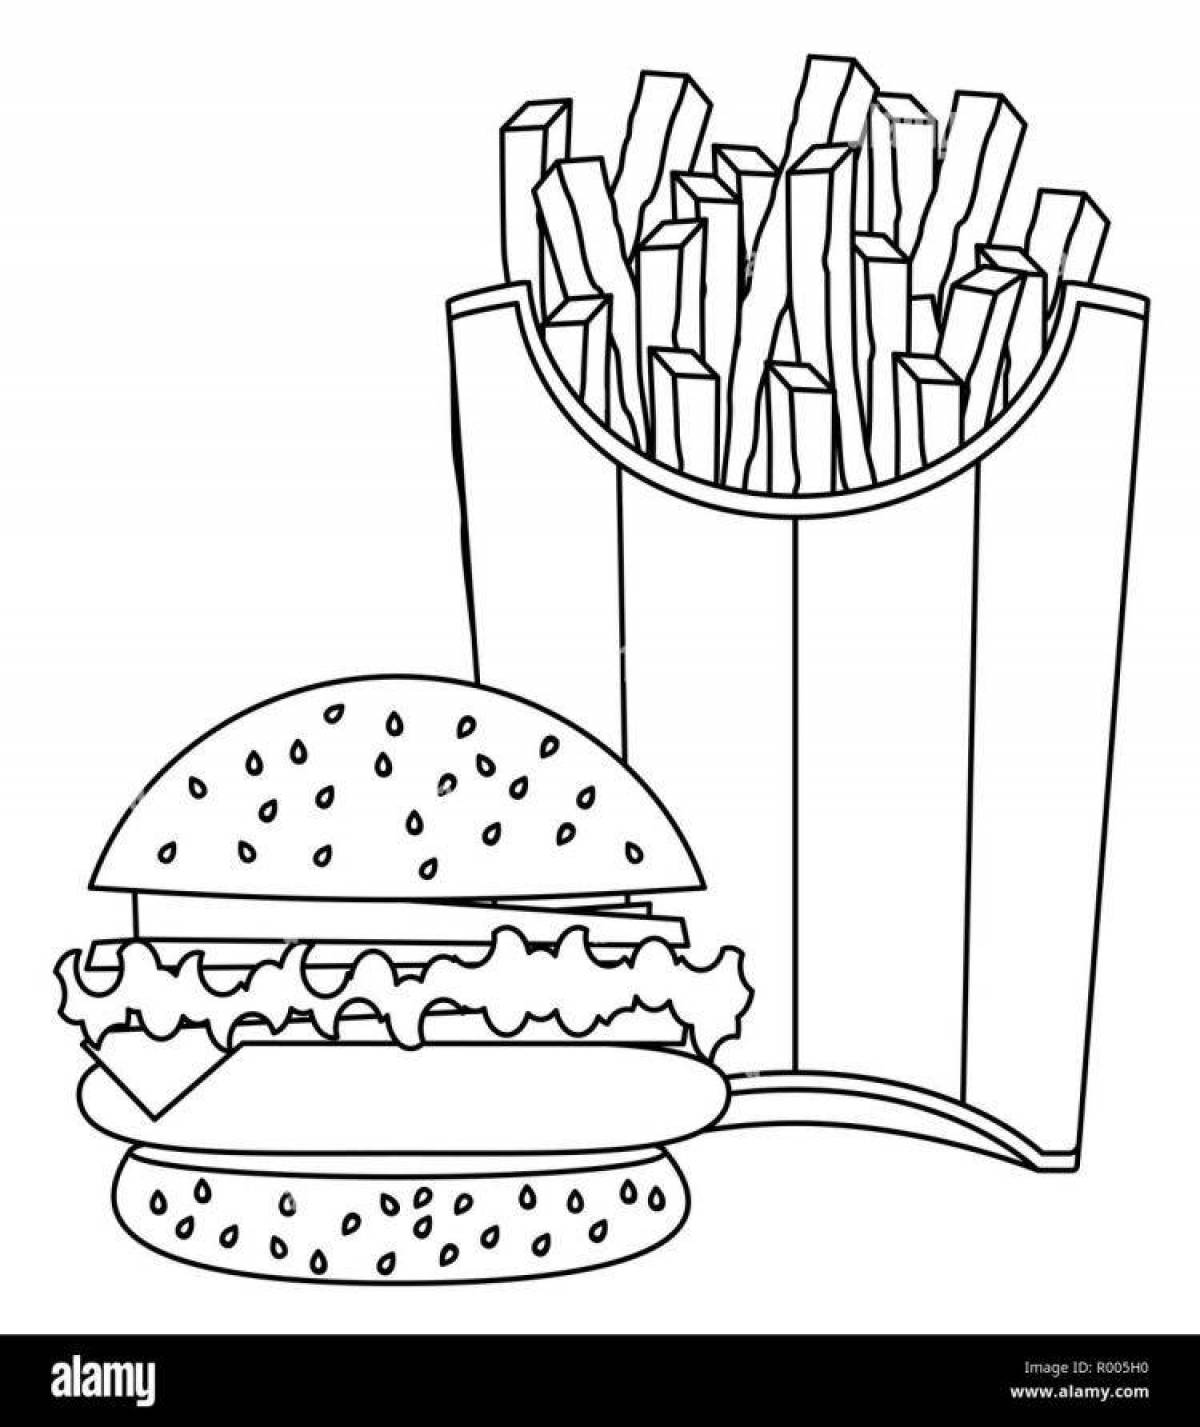 Colorful burger and fries coloring page